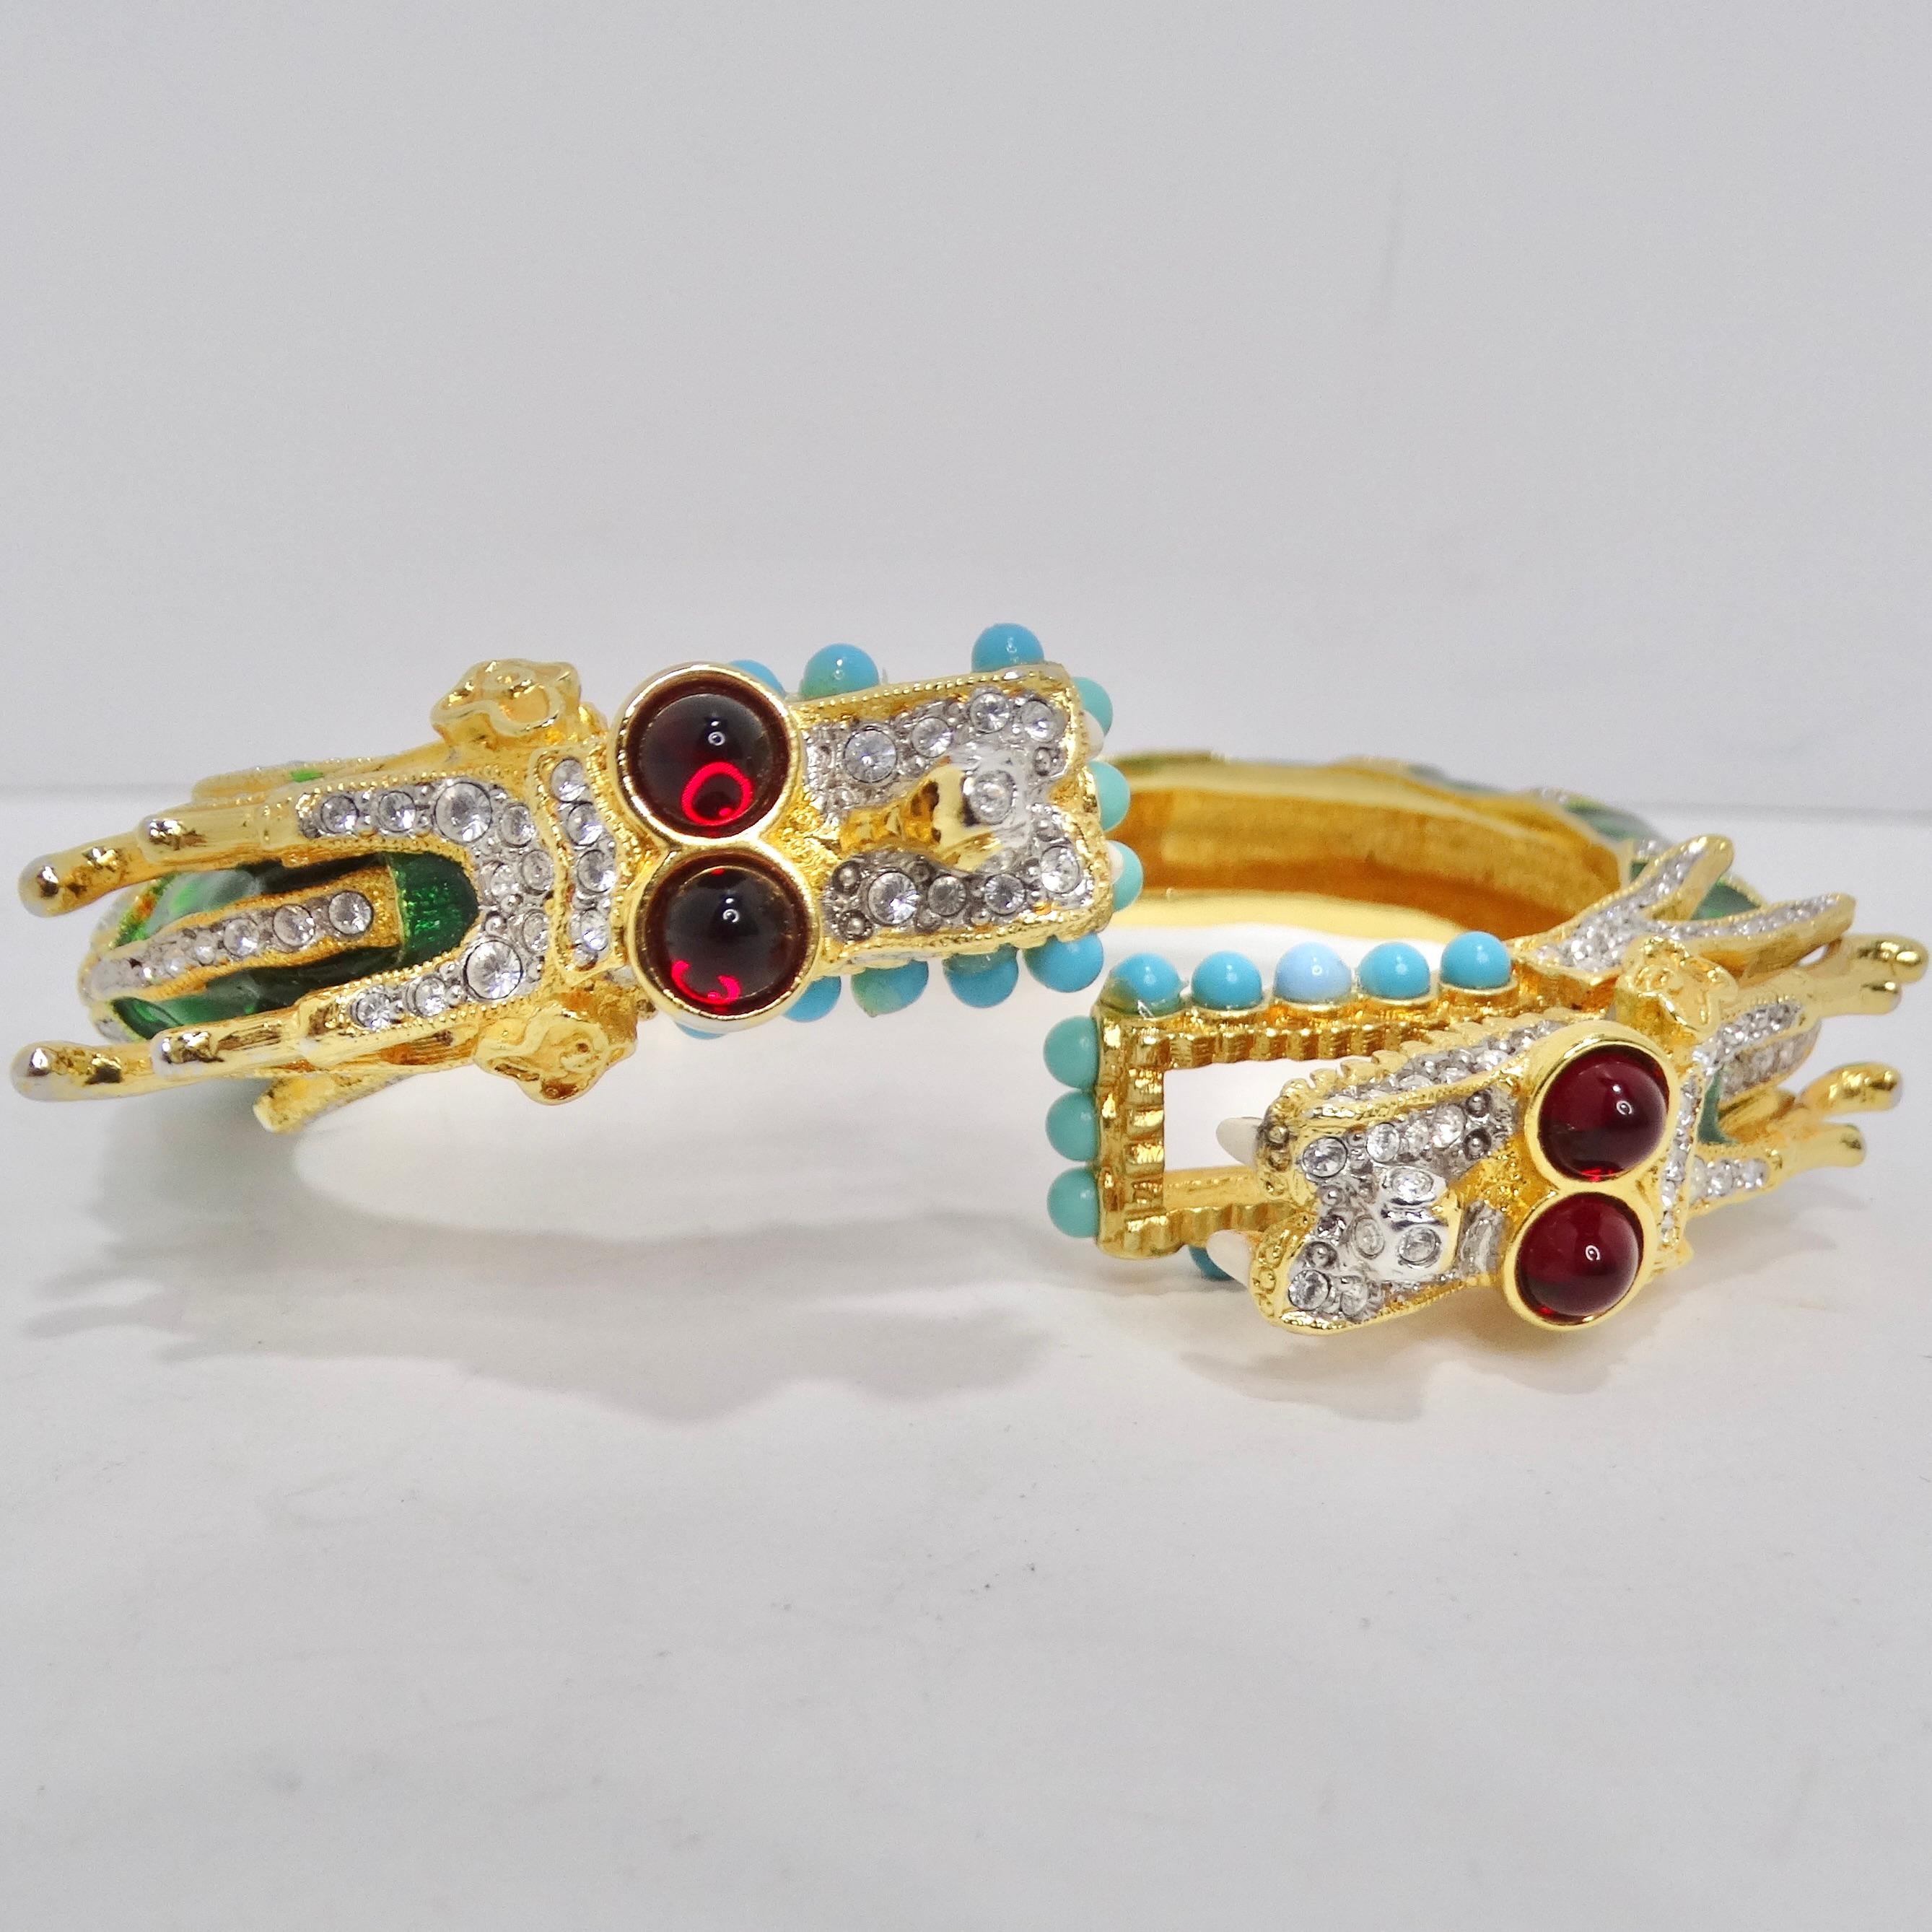 Transport yourself back to the glamorous and eclectic fashion of the 1970s with our exquisite KJL Multi Stone Dragon Head Bracelet. This clamper bracelet is a true work of art, capturing the essence of an era marked by bold and extravagant style. At